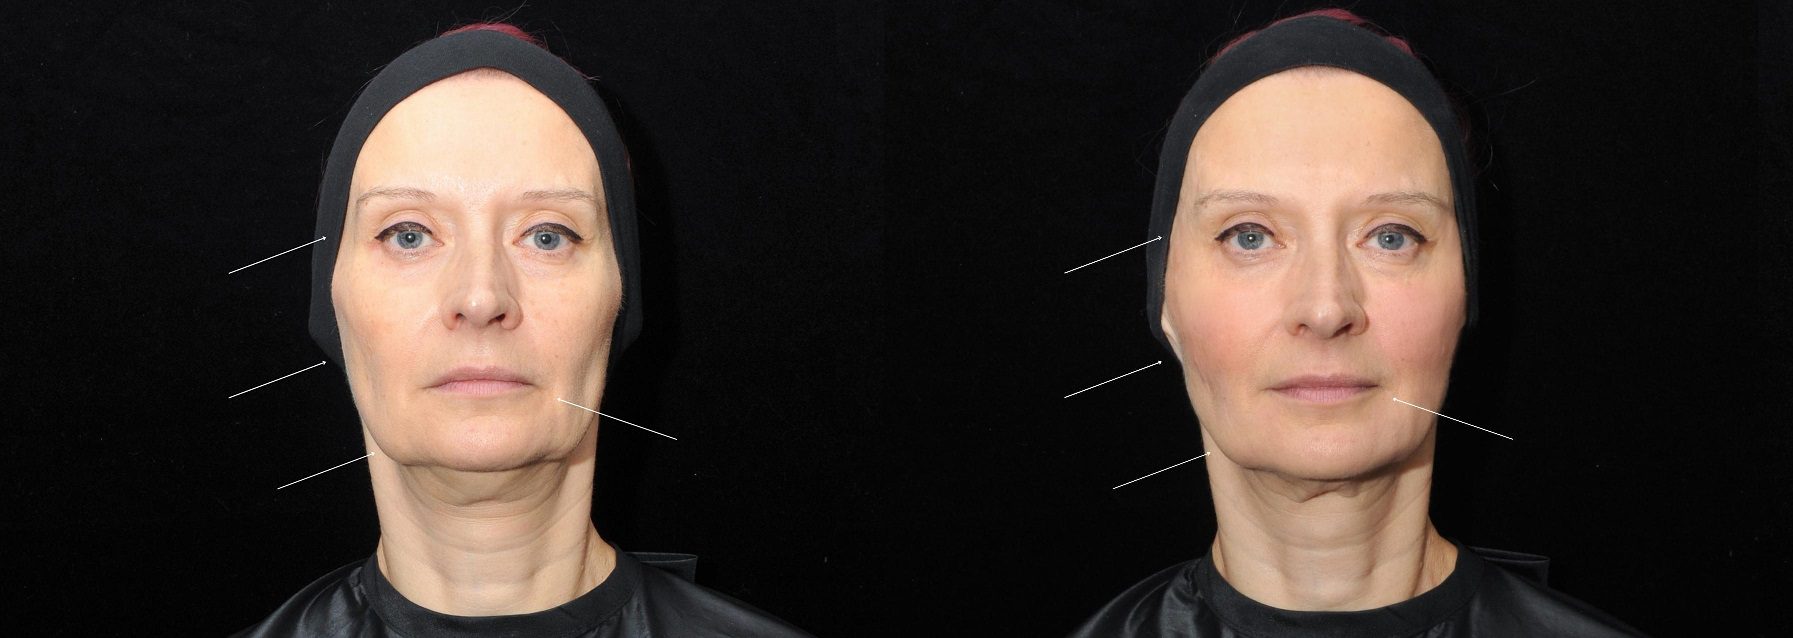 teoxane fillers facial contouring before and after